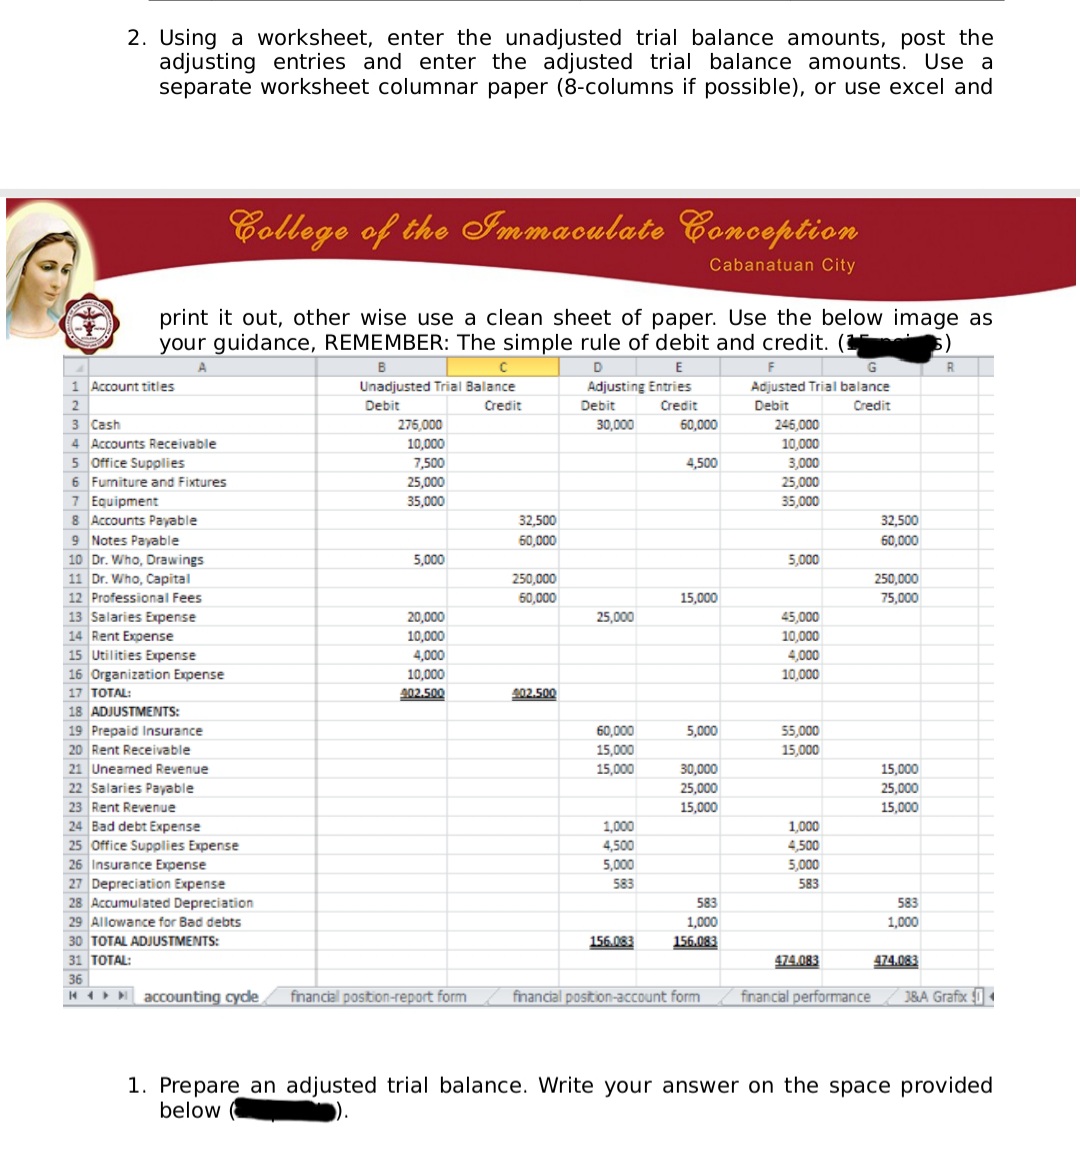 2. Using a worksheet, enter the unadjusted trial balance amounts, post the
adjusting entries and enter the adjusted trial balance amounts. Use a
separate worksheet columnar paper (8-columns if possible), or use excel and
College of the Immaculate Conoeption
Cabanatuan City
print it out, other wise use a clean sheet of paper. Use the below image as
your guidance, REMEMBER: The simple rule of debit and credit.
R.
1 Account titles
Unadjusted Trial Balance
Adjusting Entries
Credit
Adjusted Trial balance
Debit
Credit
Debit
Debit
Credit
3 Cash
4 Accounts Receivable
276,000
30,000
60,000
245,000
10,000
10,000
Office Supplies
6 Fumiture and Fixtures
7 Equipment
8 Accounts Payable
9 Notes Payable
10 Dr. Who, Drawings
11 Dr. Who, Capital
12 Professional Fees
13 Salaries Expense
14 Rent Expense
15 Utilities Expense
16 Organization Expense
7,500
4,500
3,000
25,000
25,000
35,000
35,000
32,500
32,500
60,000
60,000
5,000
5,000
250,000
250,000
60,000
15,000
75,000
20,000
25,000
45,000
10,000
10,000
4,000
4,000
10,000
10,000
17 TOTAL:
202.500
202.500
18 ADJUSTMENTS:
19 Prepaid Insurance
20 Rent Receivable
21 Uneamed Revenue
22 Salaries Payable
60,000
5,000
55,000
15,000
15,000
15,000
30,000
15,000
25,000
25,000
23 Rent Revenue
15,000
15,000
24 Bad debt Expense
1,000
1,000
25 Office Supplies Expense
26 Insurance Expense
27 Depreciation Expense
28 Accumulated Depreciation
29 Allowance for Bad debts
4,500
5,000
4,500
5,000
583
583
583
583
1,000
1,000
30 TOTAL ADJUSTMENTS:
156.083
156.083
31 TOTAL:
474.083
474.083
36
H4 accounting cyde
financial position-account form
financial performance
1&A Grafix 0
financial postion-report form
1. Prepare an adjusted trial balance. Write your answer on the space provided
below
